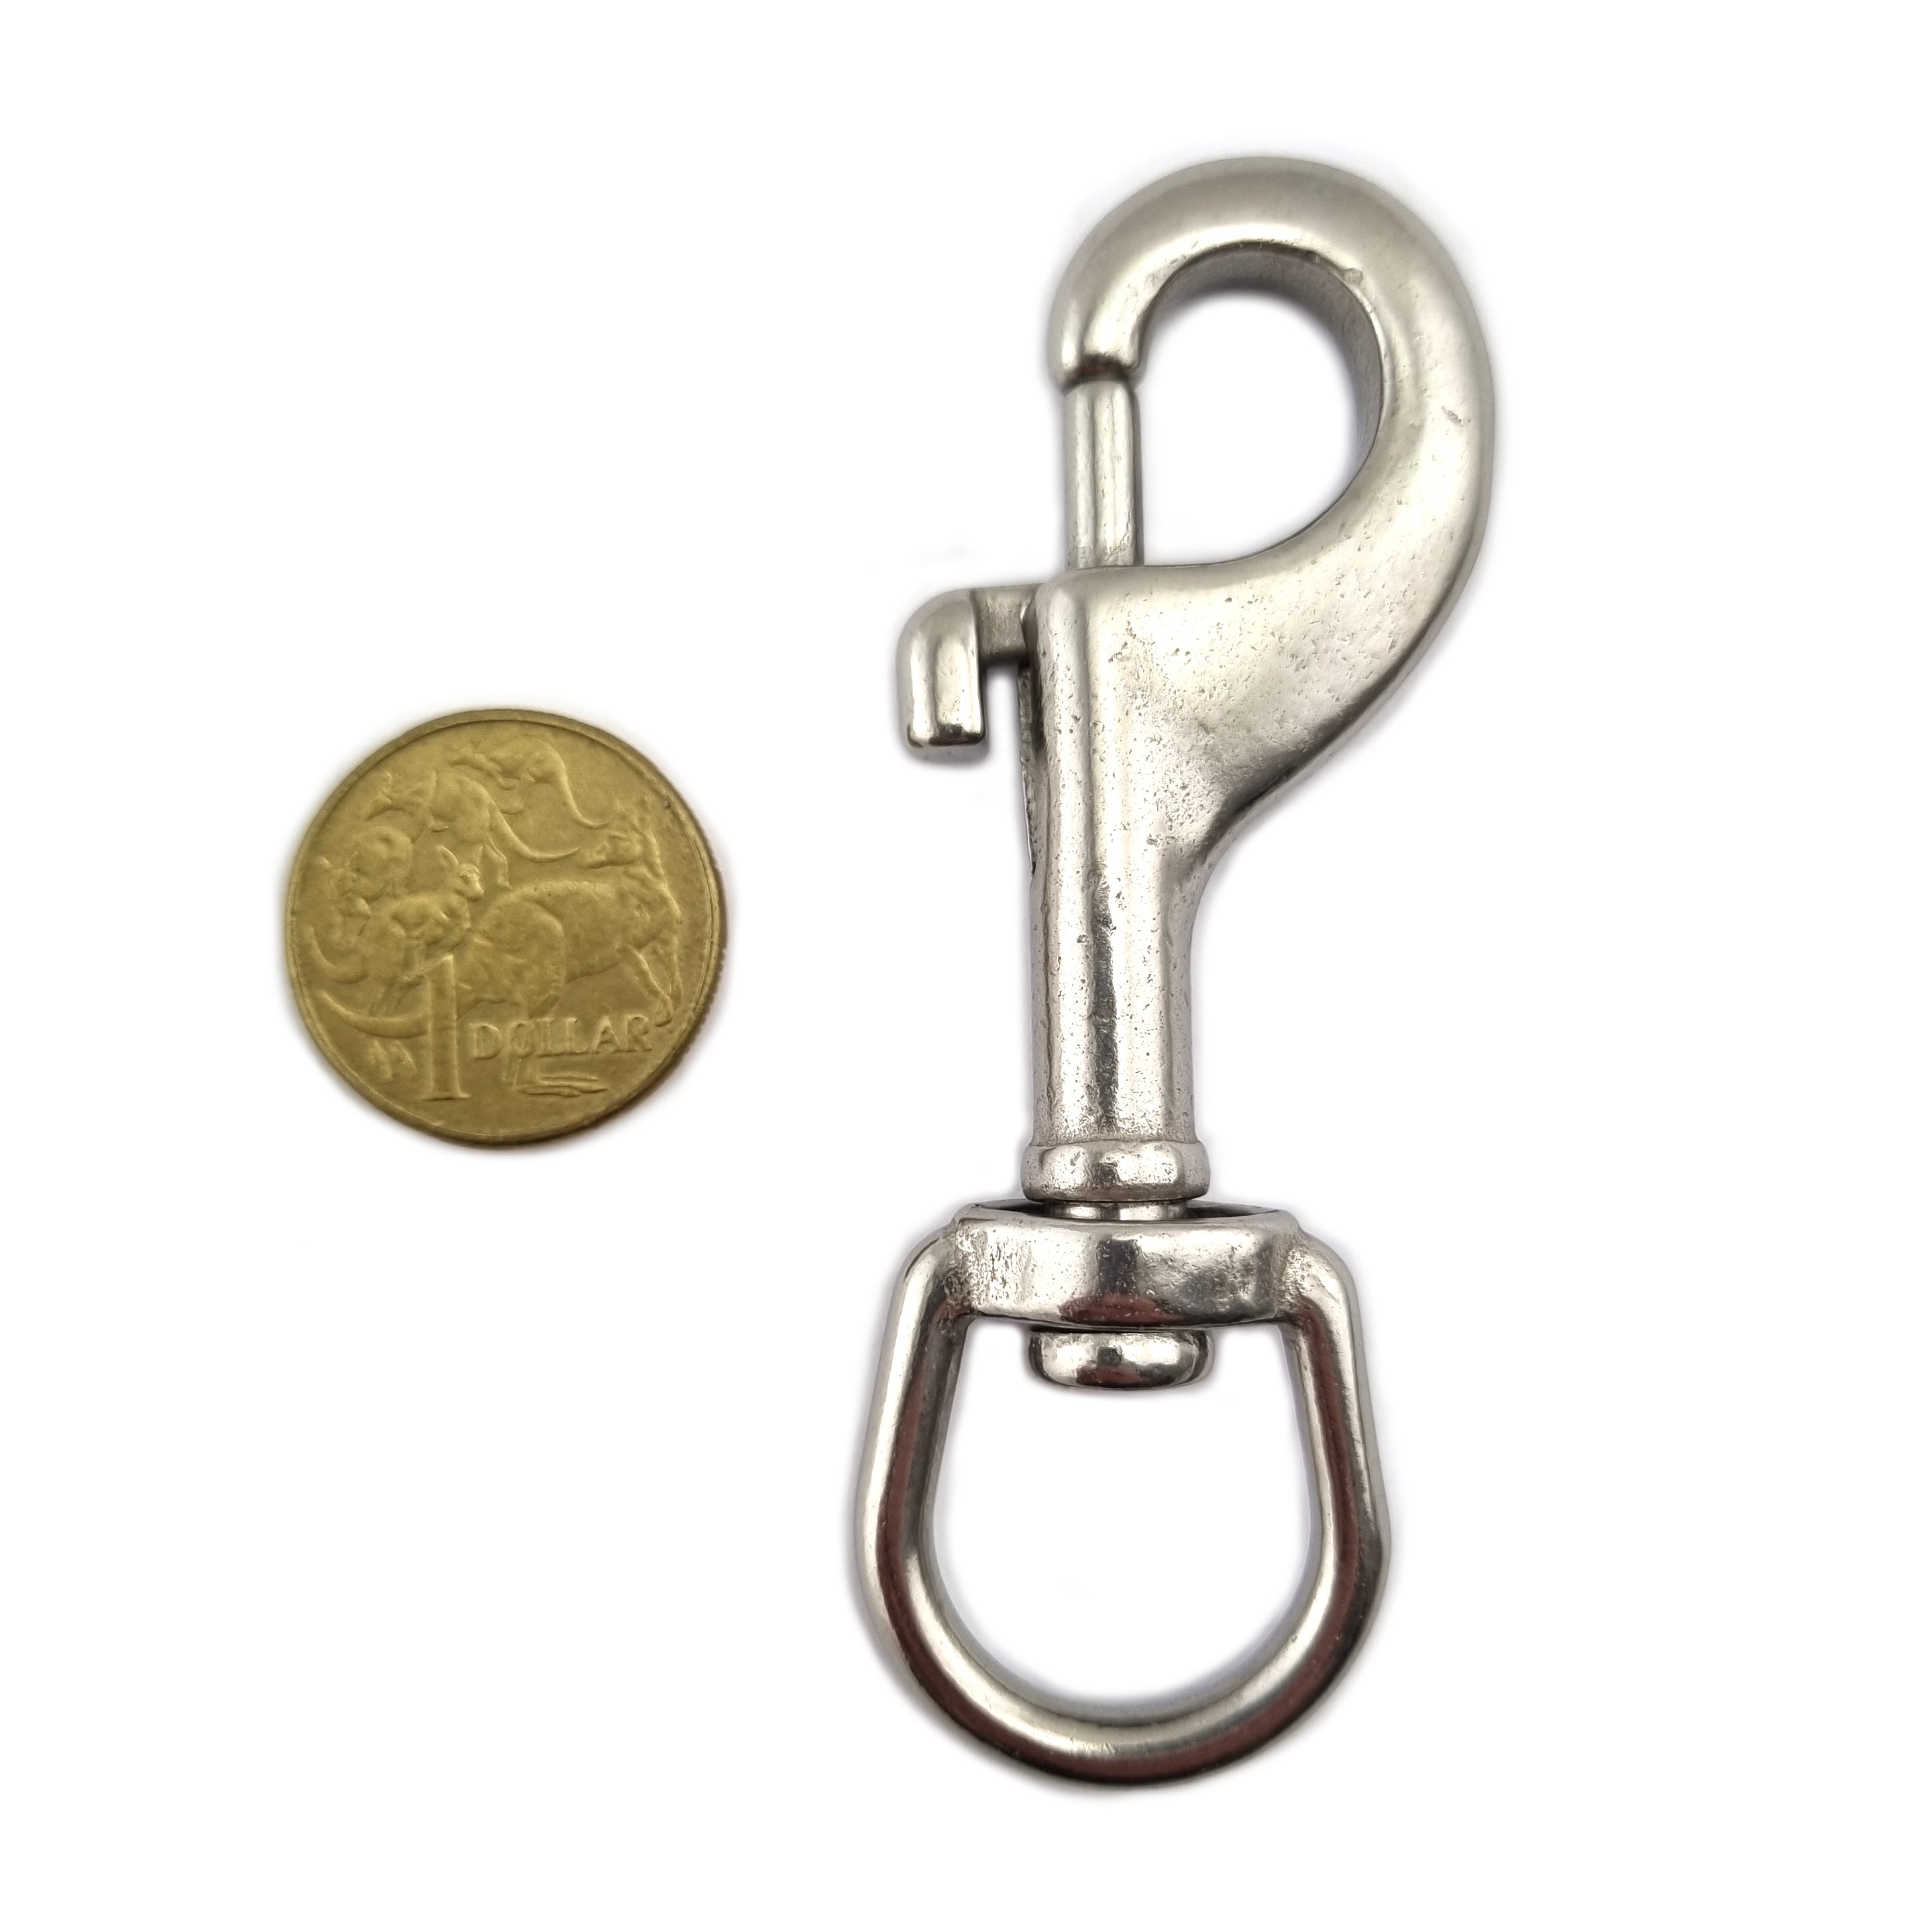 Pet / Dog collar snap hook (or round swivel eye bolt snap hook) in stainless steel. Shop chain.com.au